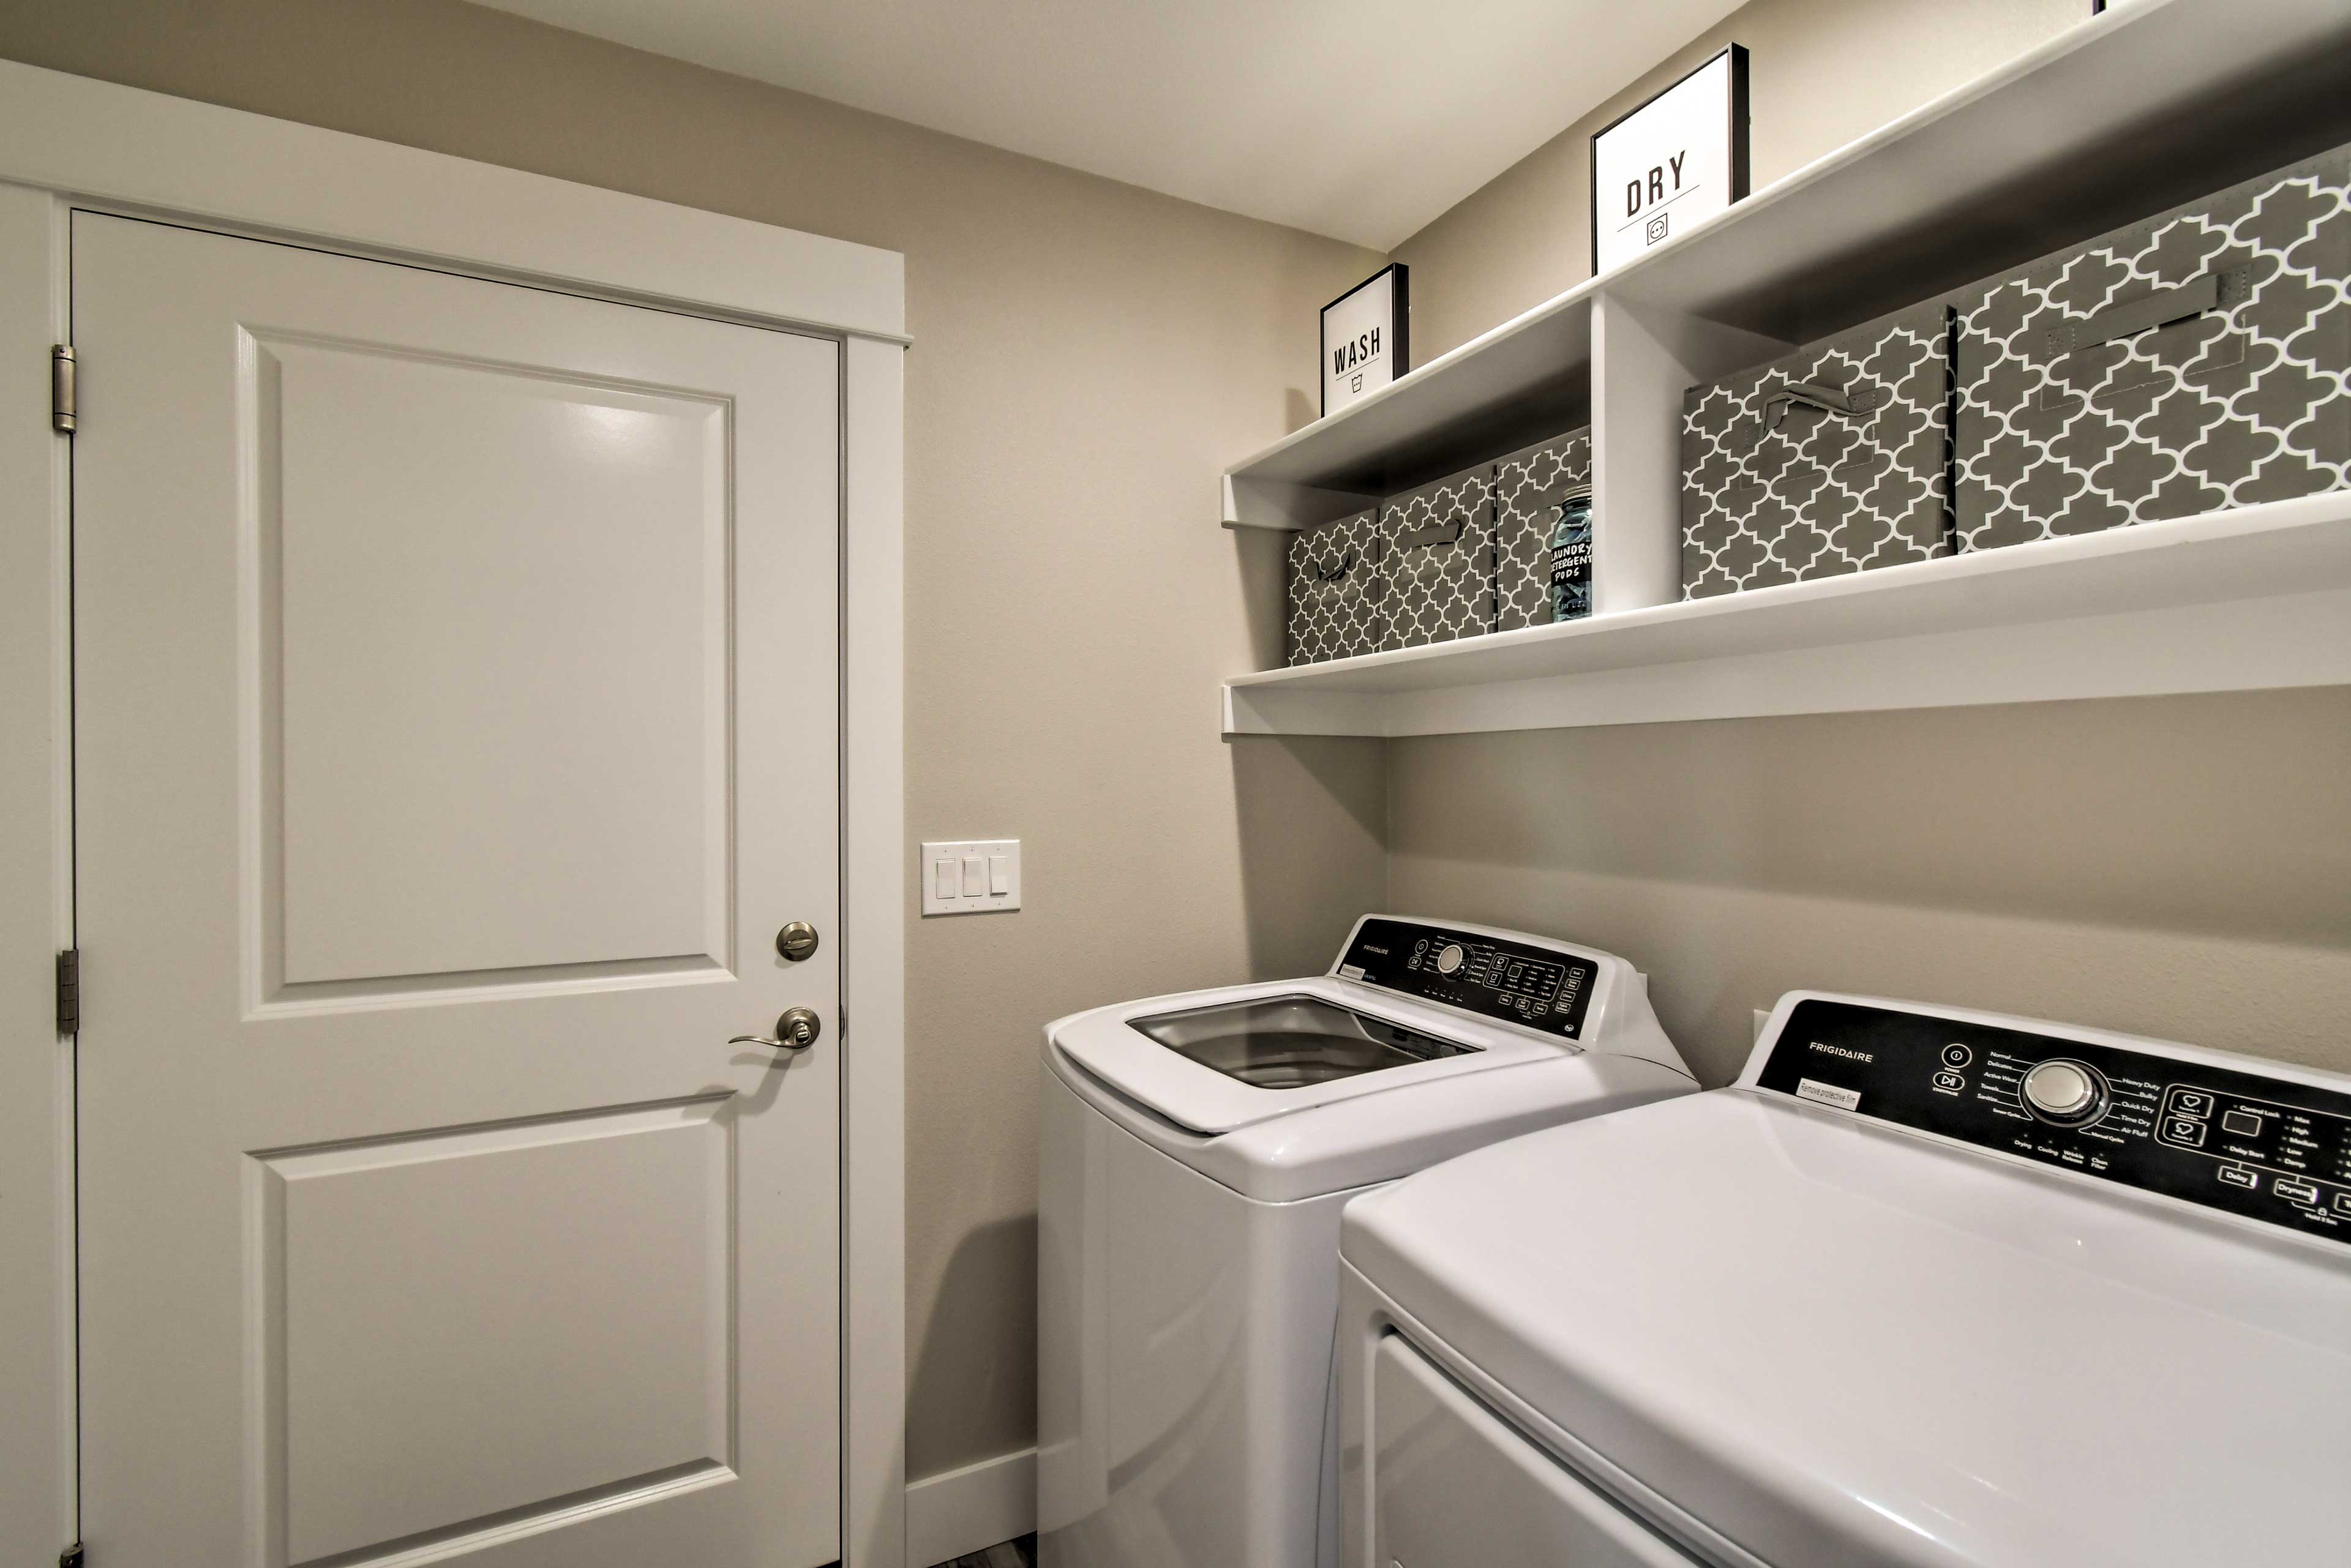 Laundry Room | Laundry Detergent | Hangers | Iron & Board